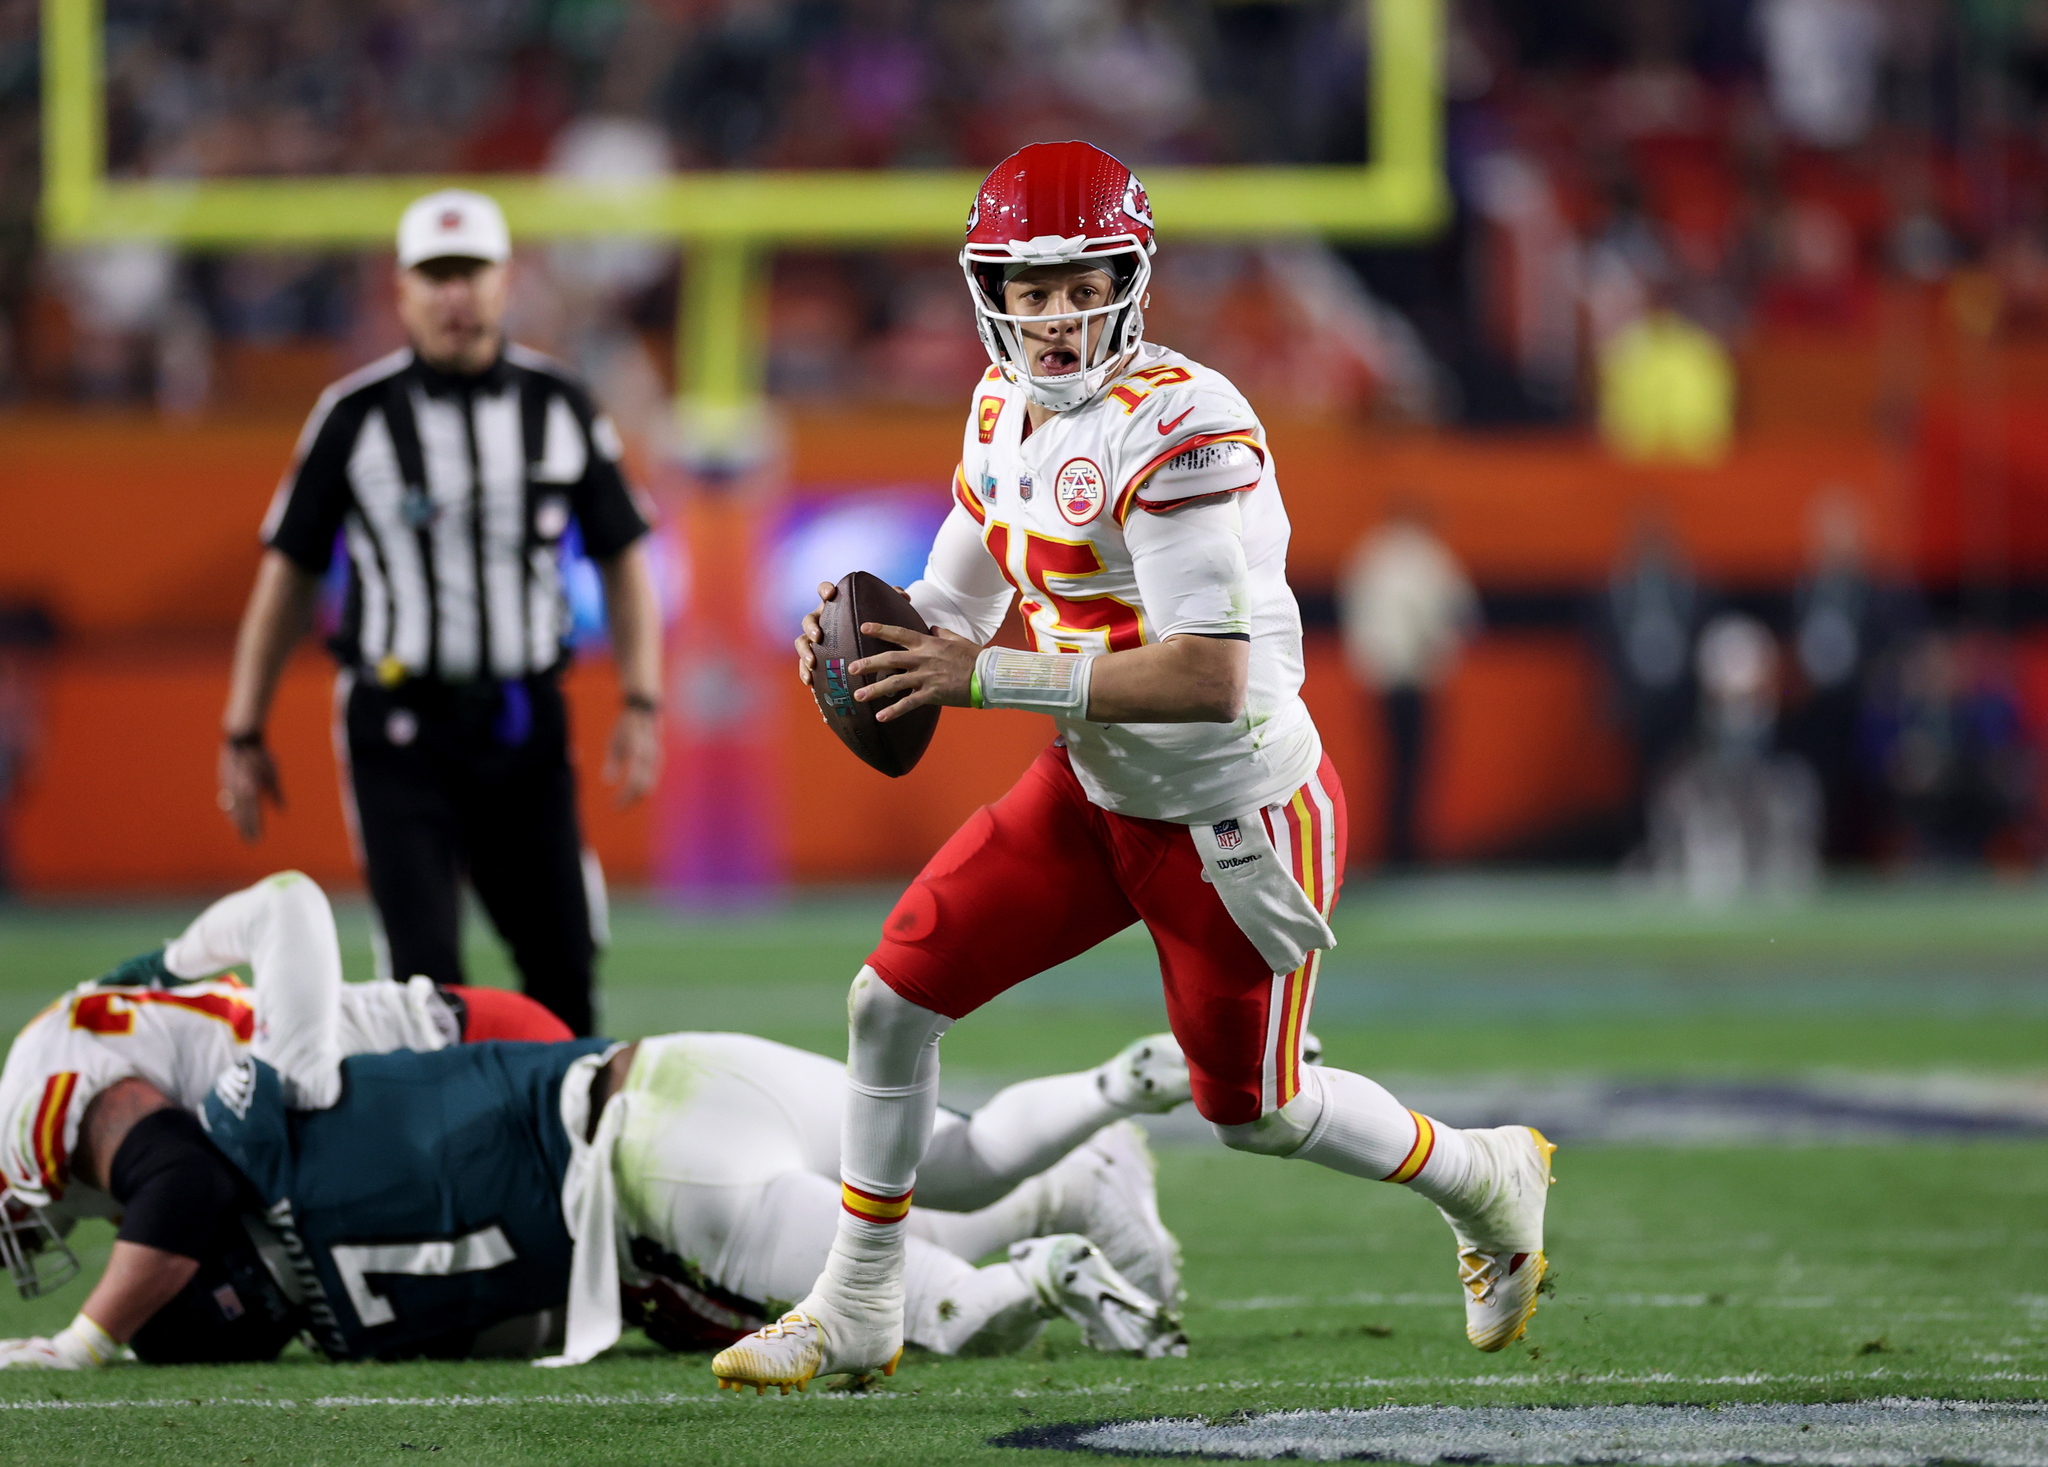 Glendale (United States), 12/02/2023.- Kansas City Chiefs quarterback Patrick  lt;HIT gt;Mahomes lt;/HIT gt; in action during the third quarter of Super Bowl LVII between the AFC champion Kansas City Chiefs and the NFC champion Philadelphia Eagles at State Farm Stadium in Glendale, Arizona, 12 February 2023. The annual Super Bowl is the Championship game of the NFL between the AFC Champion and the NFC Champion and has been held every year since January of 1967. (Estados Unidos, Filadelfia) EFE/EPA/CAROLINE BREHMAN